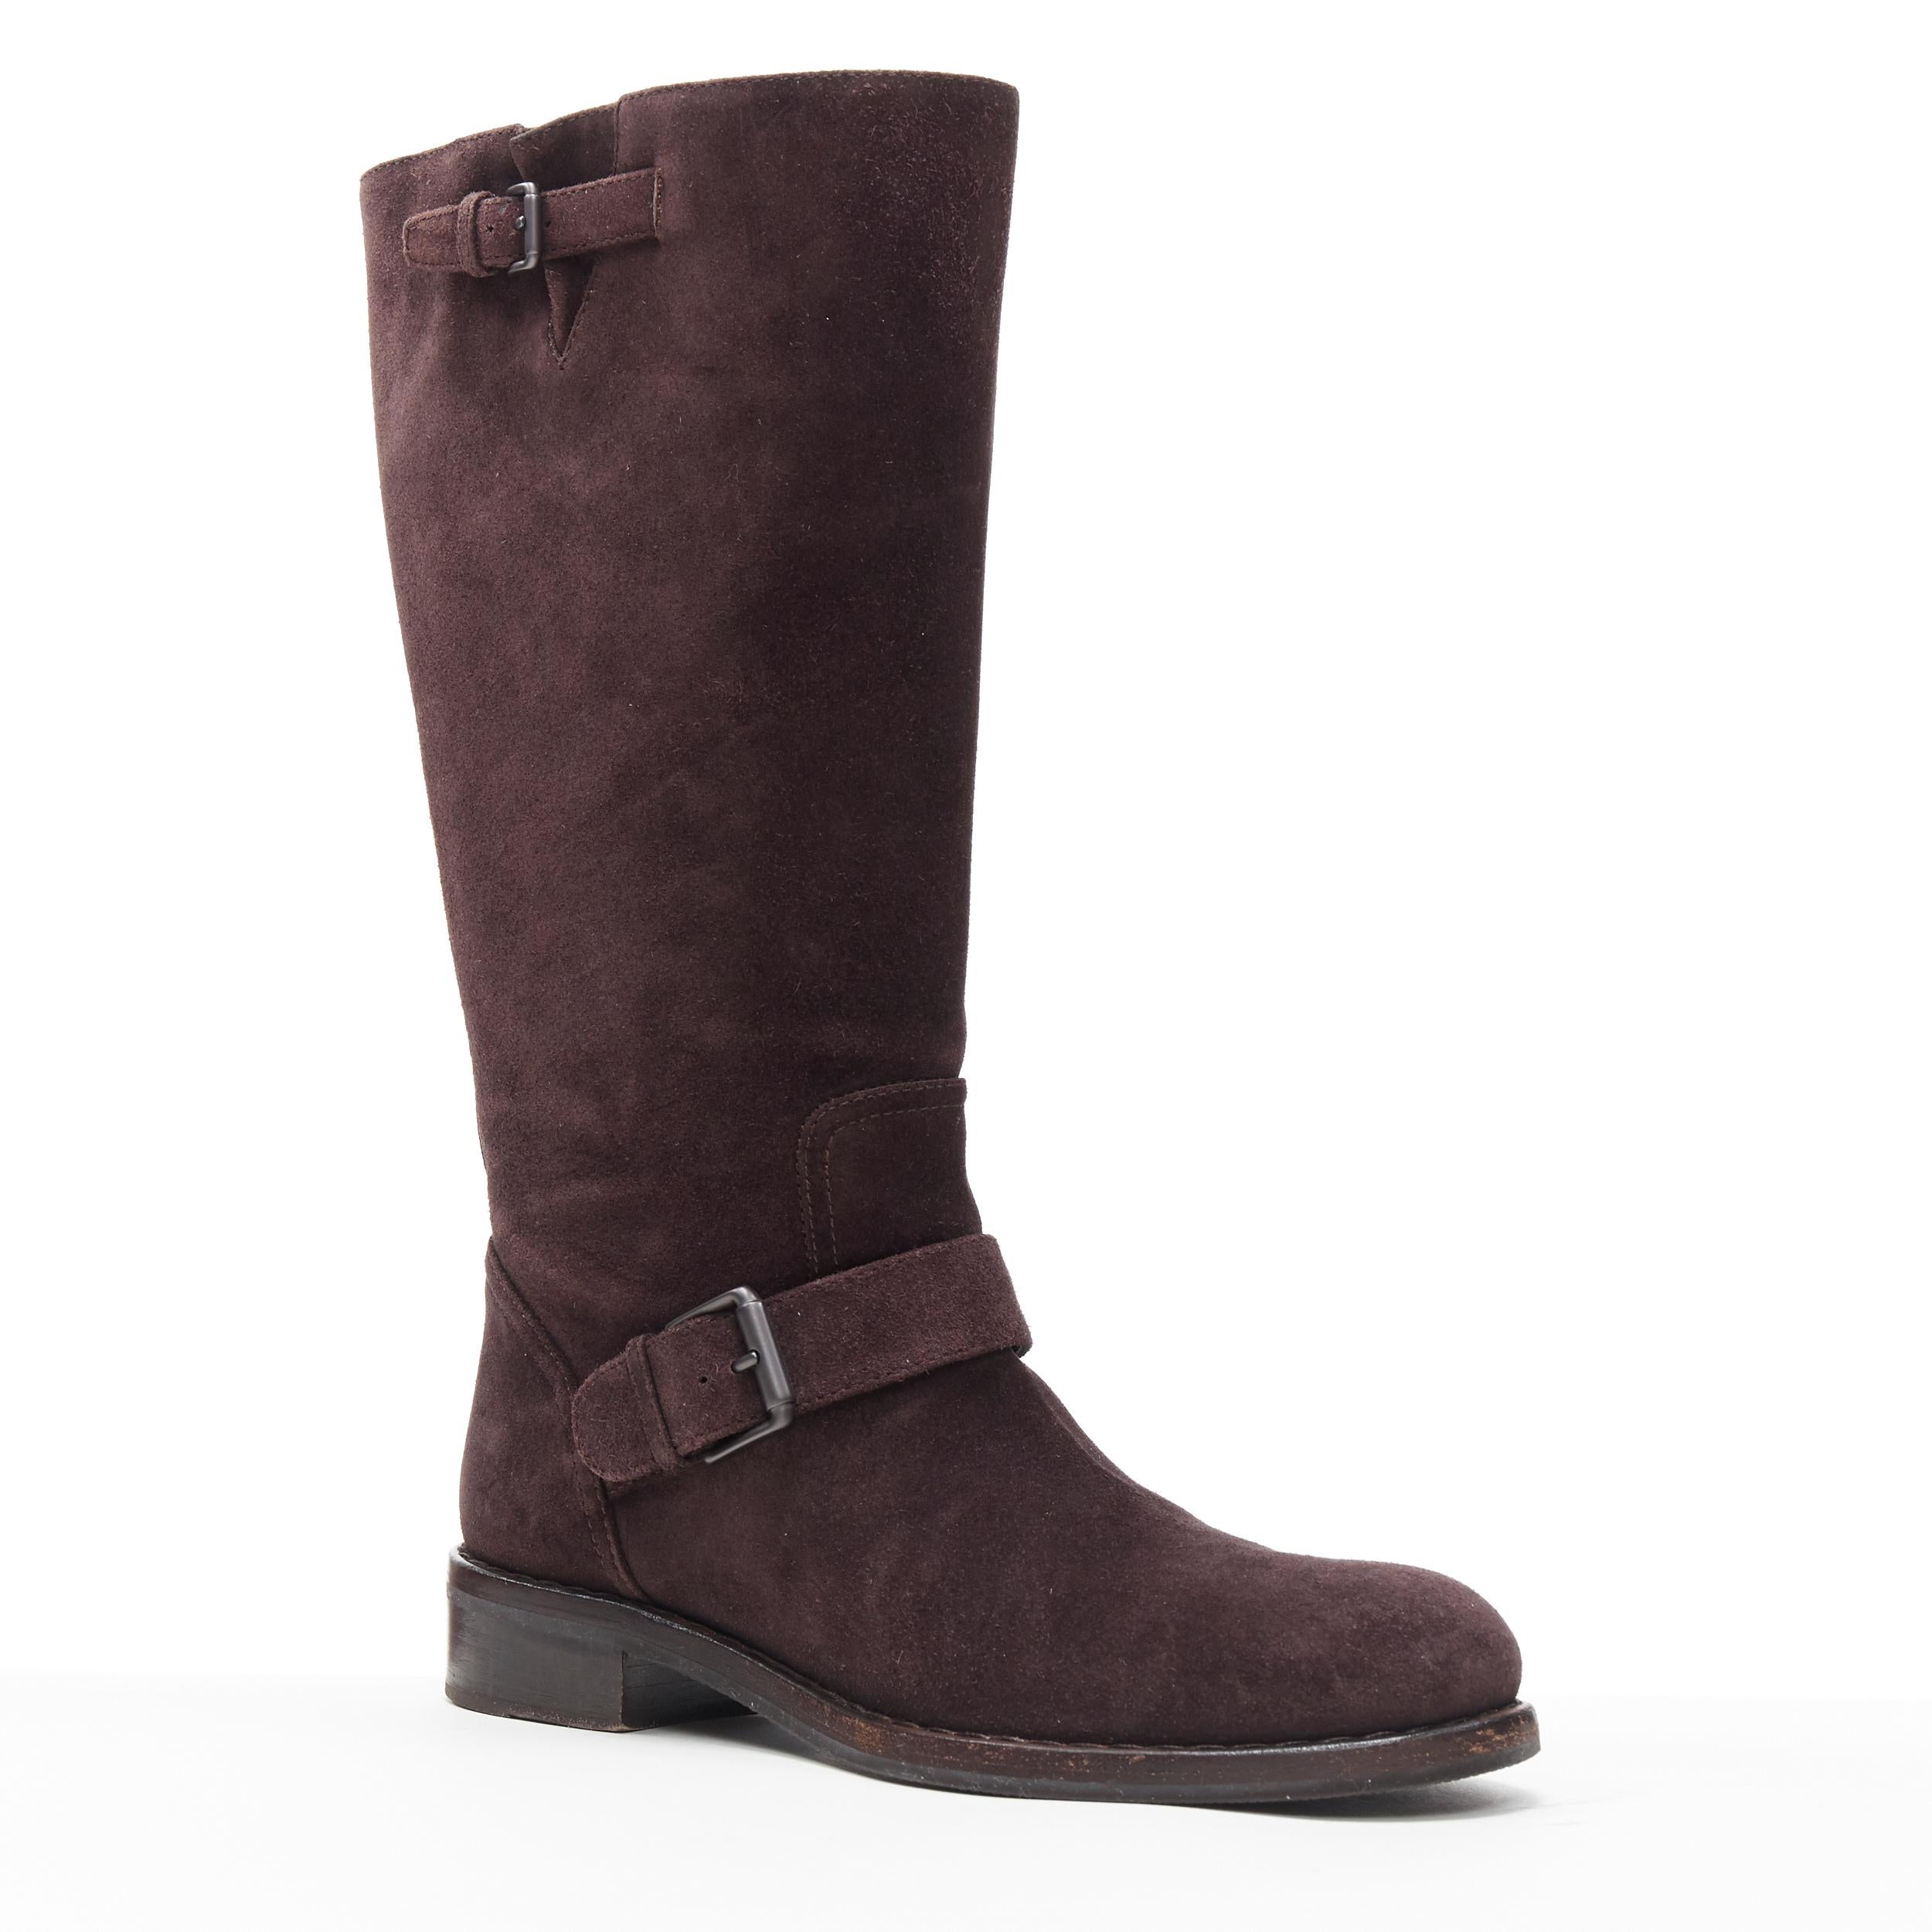 BOTTEGA VENETA dark brown suede leather buckled pull on tall boot EU37.5
Brand: Bottega Veneta
Designer: Tomas Maier
Model Name / Style: Pull on boot
Material: Suede
Color: Brown
Pattern: Solid
Closure: Pull on
Extra Detail: Round toe. Stacked